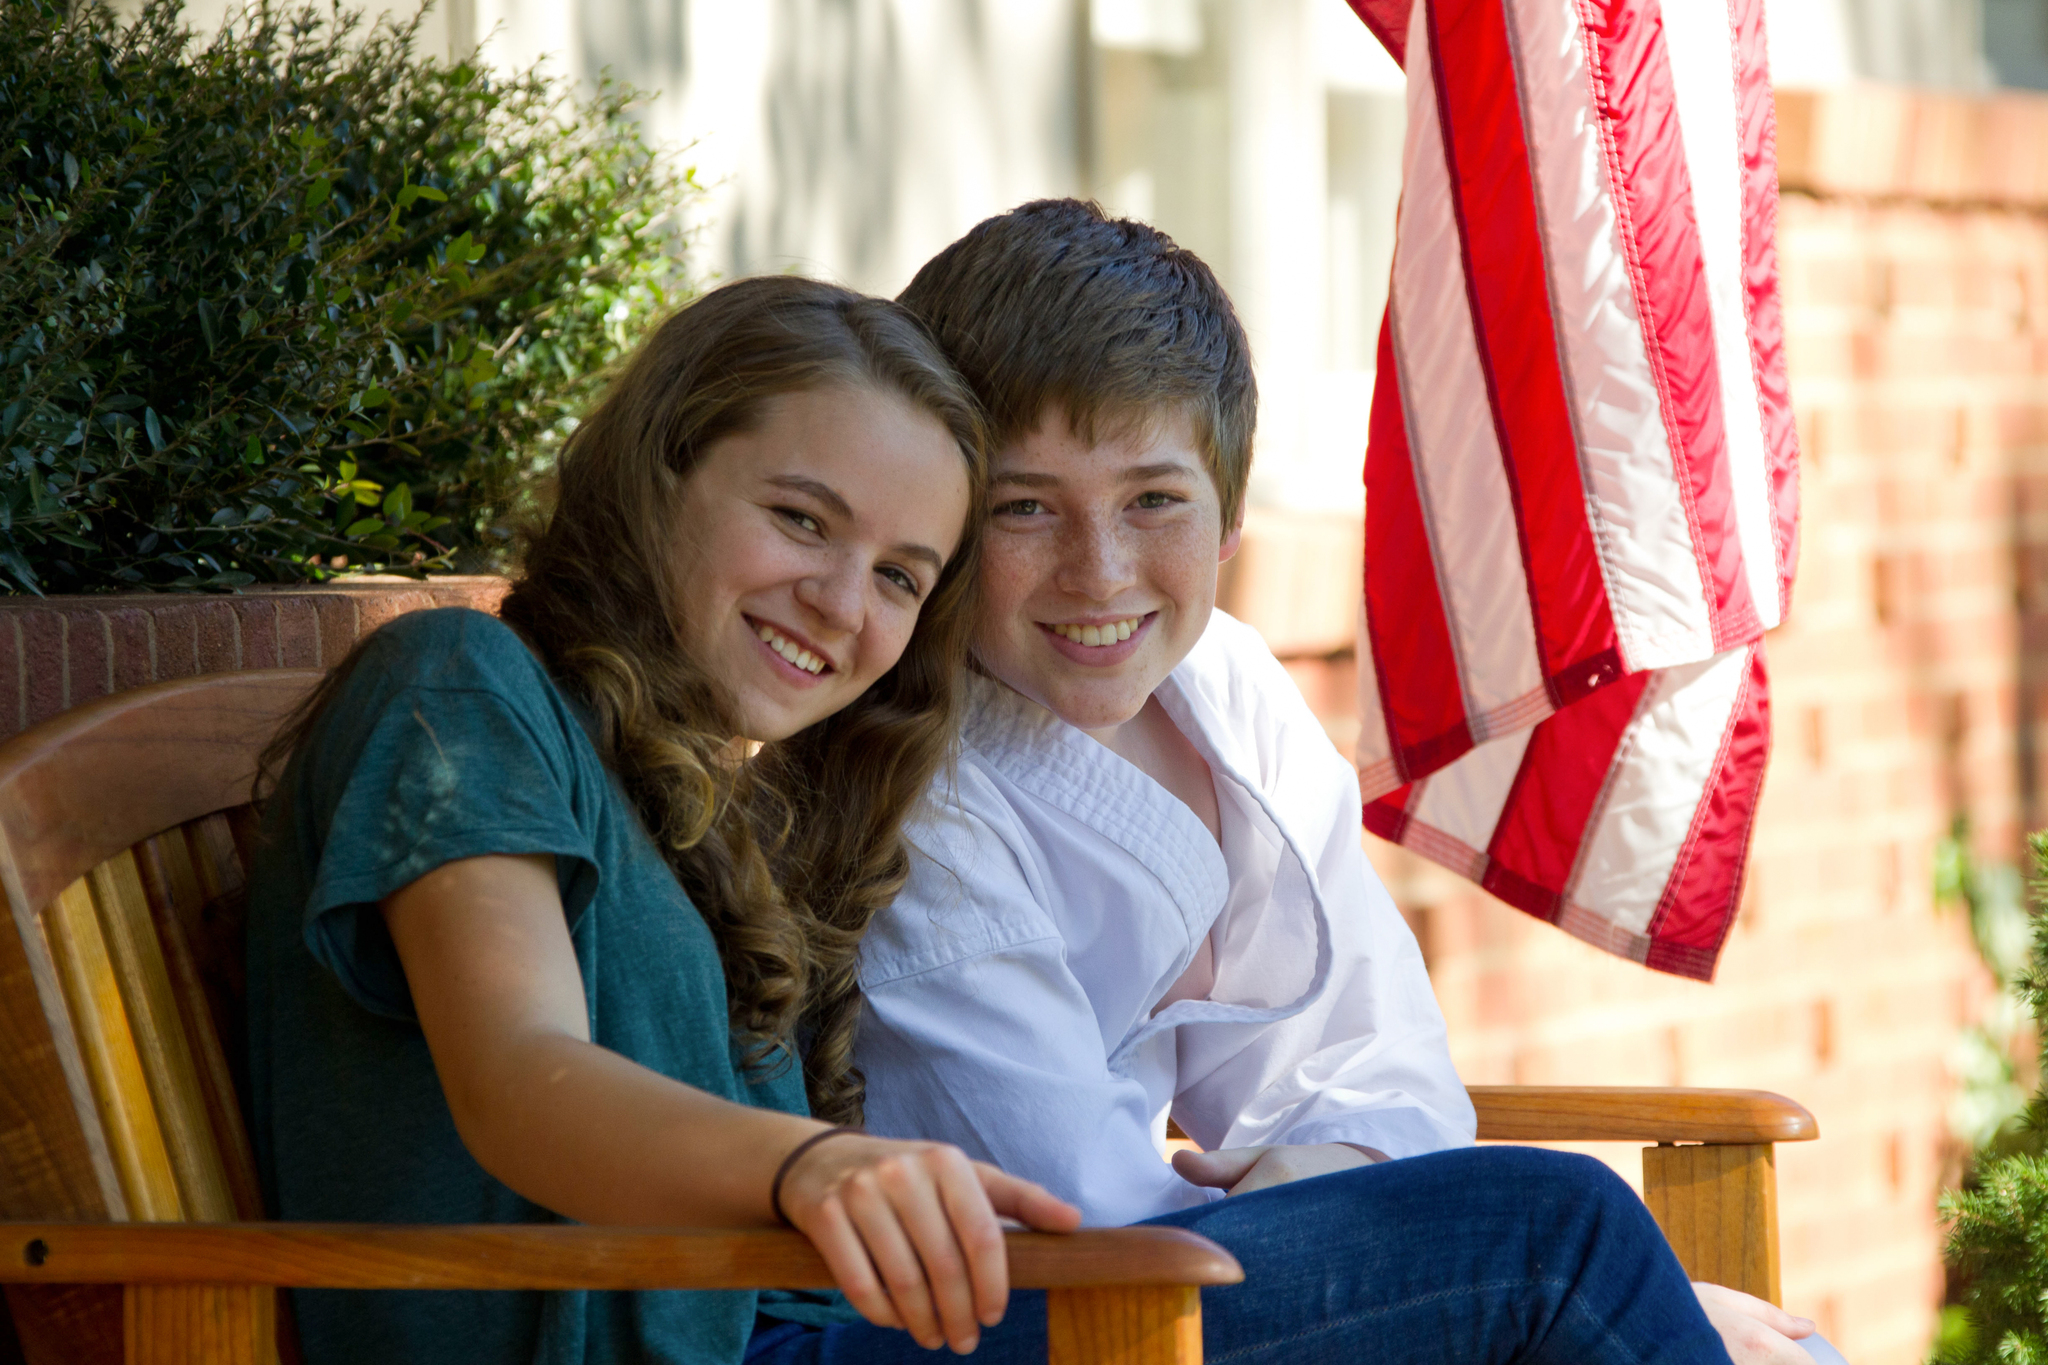 Still of Jackson Pace and Morgan Saylor in Tevyne (2011)